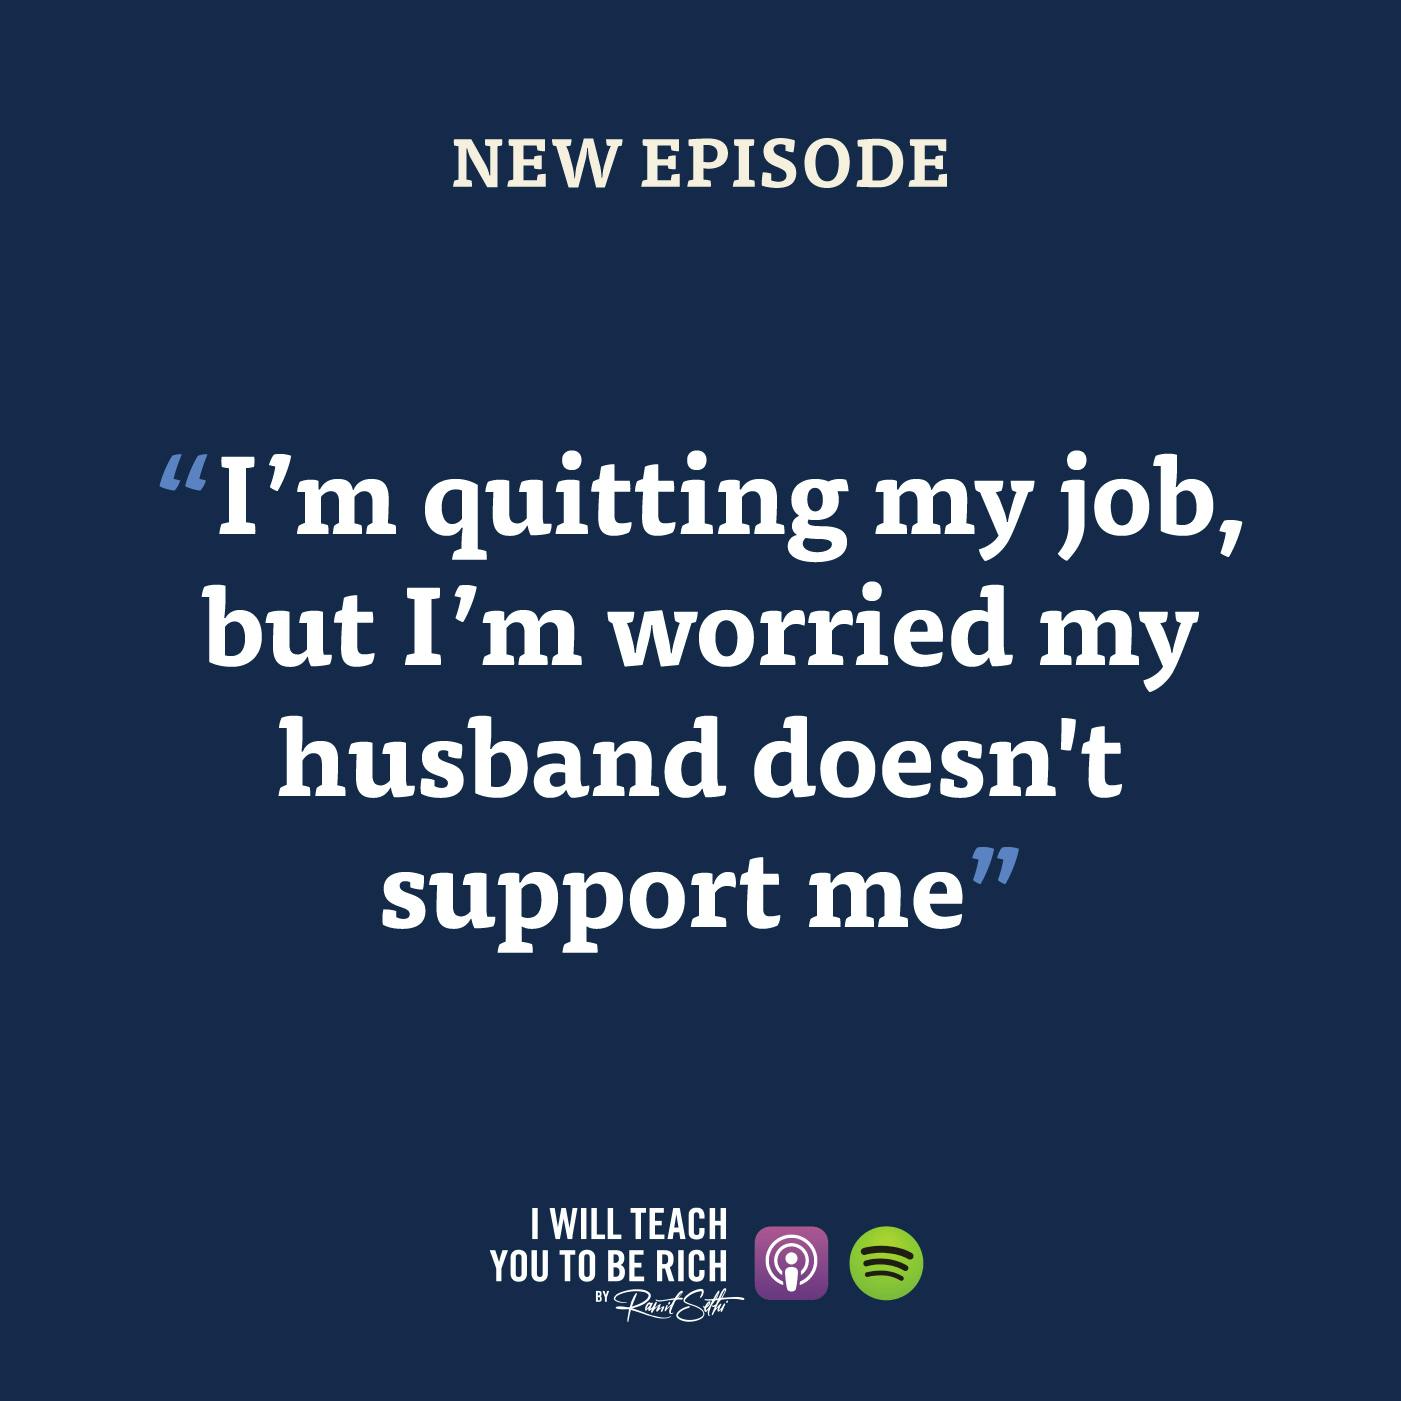 22. “I’m quitting my job, but I’m worried my husband doesn’t support me”